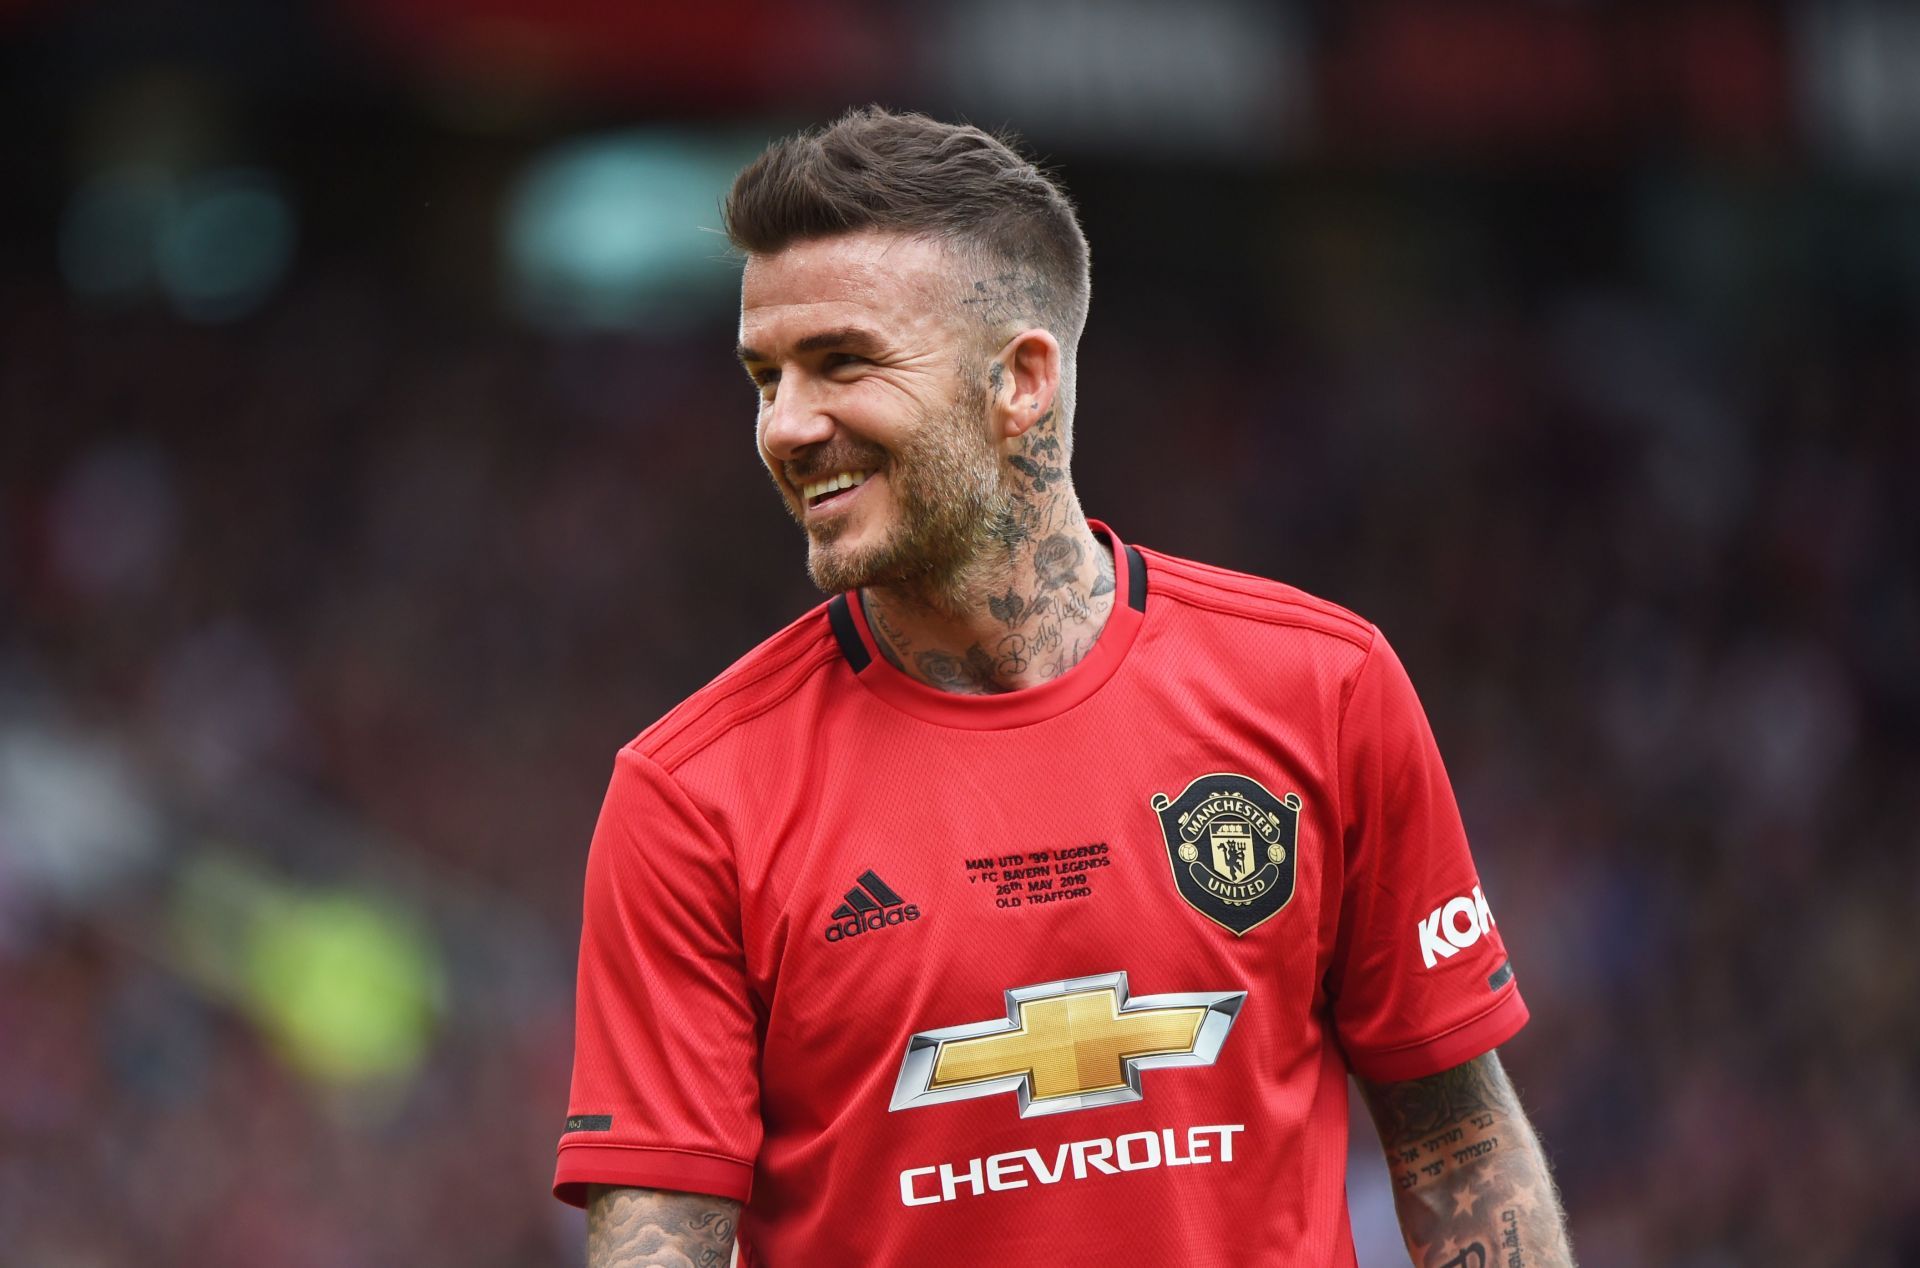 Beckham wore the Number 7 shirt vacated by Cantona with distinction